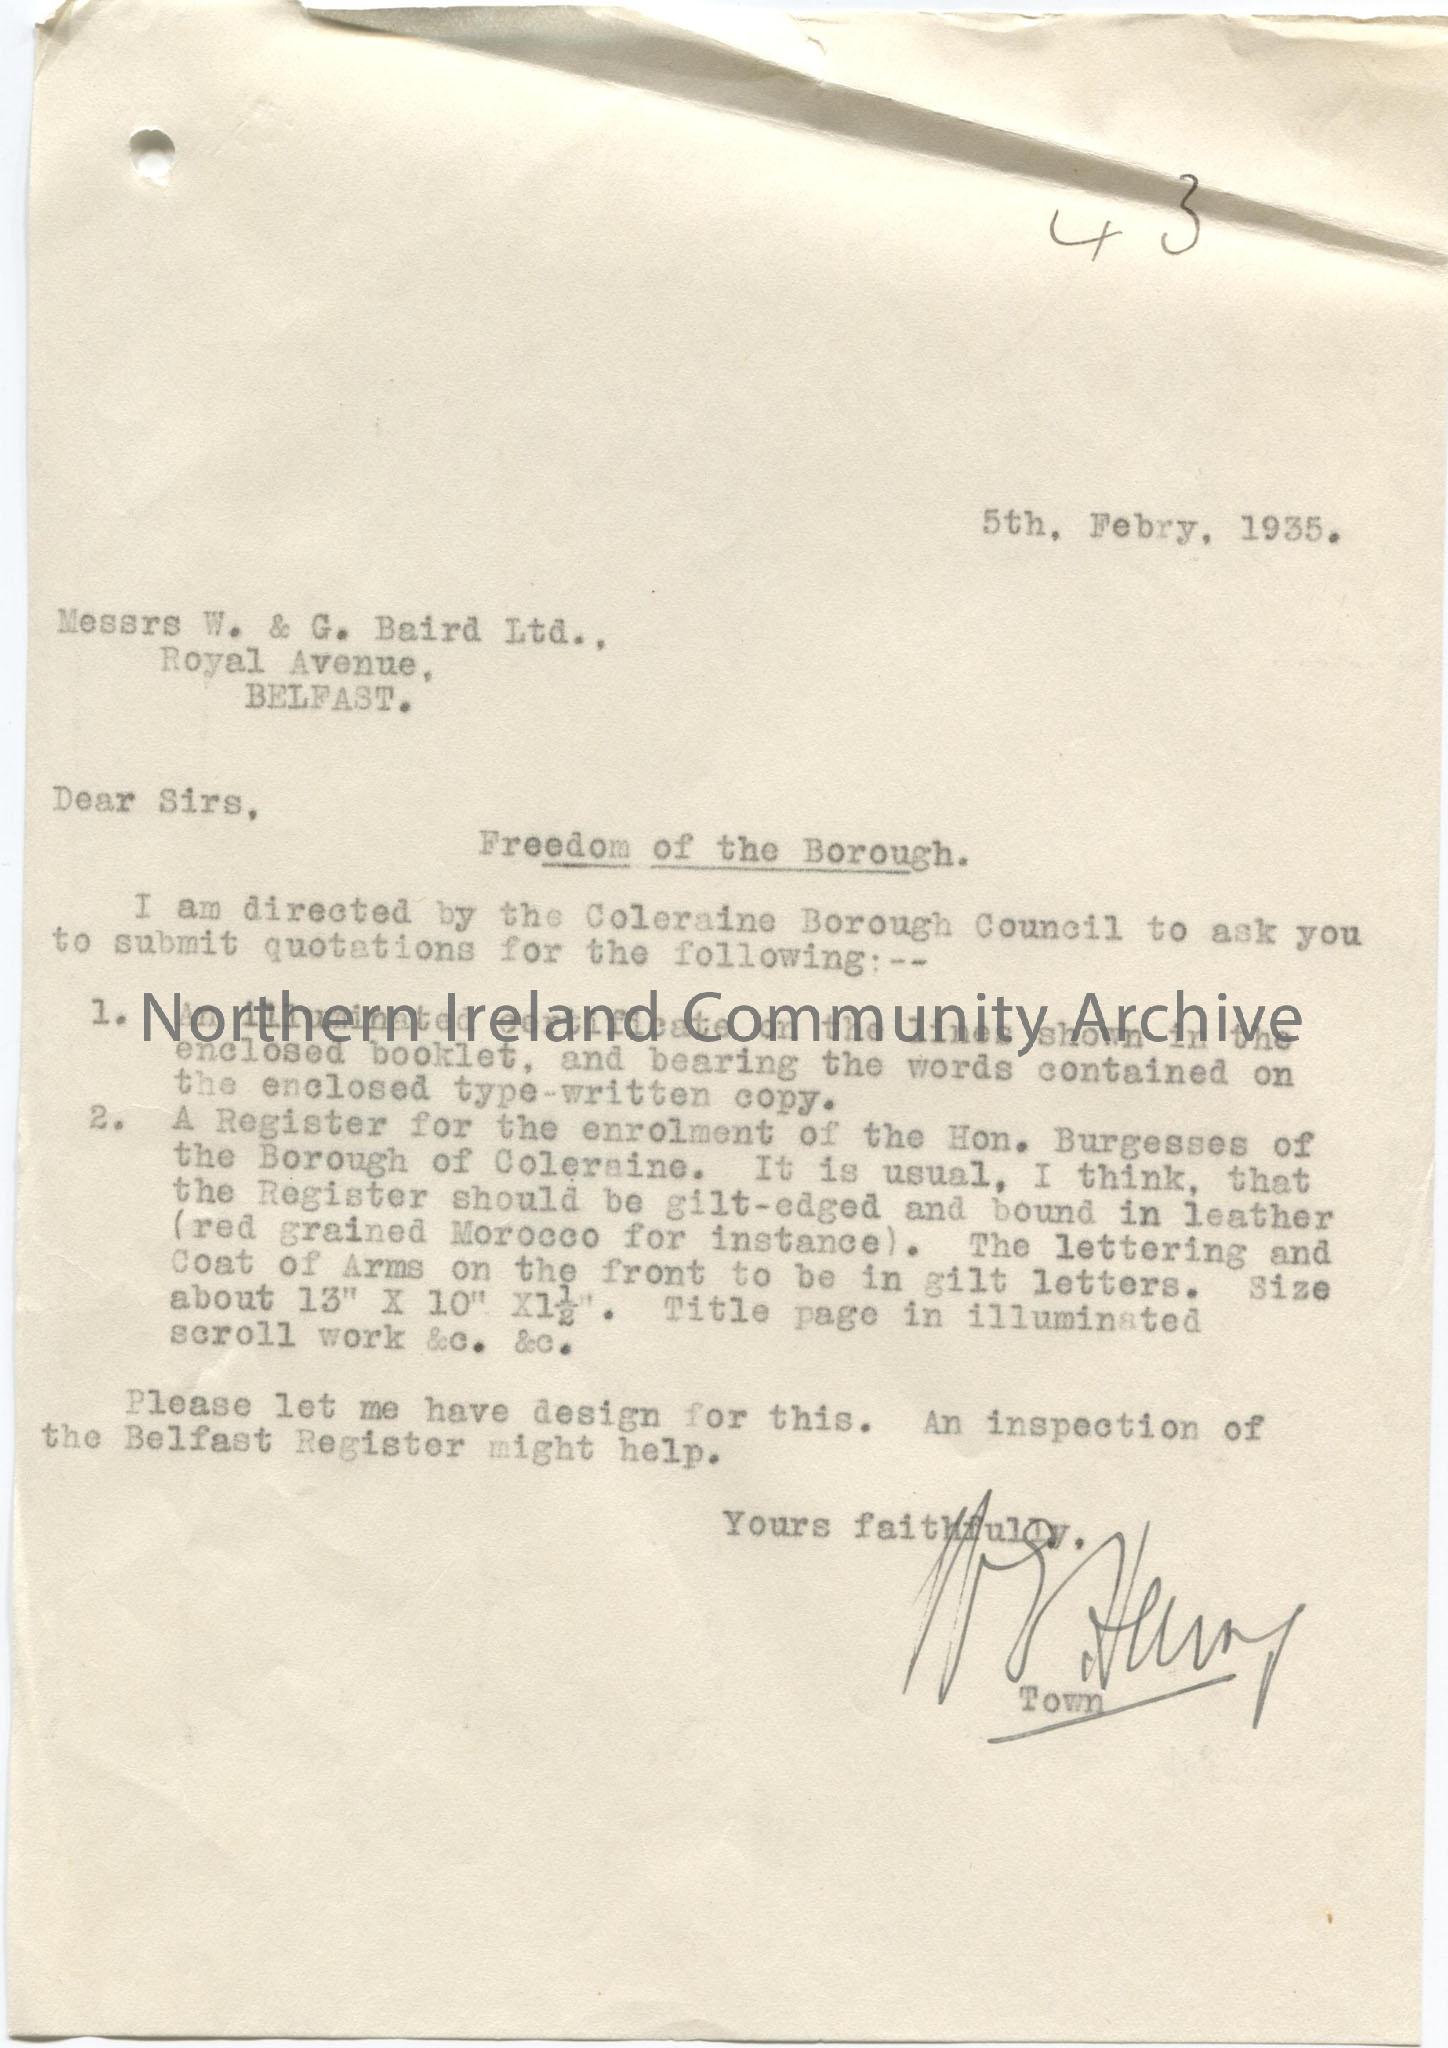 Letter to W. & G. Baird Ltd from the Town Clerk of Coleraine Borough Council W. E. Henry. Re: Freedom of the Borough. Asking for a quotation for an il…